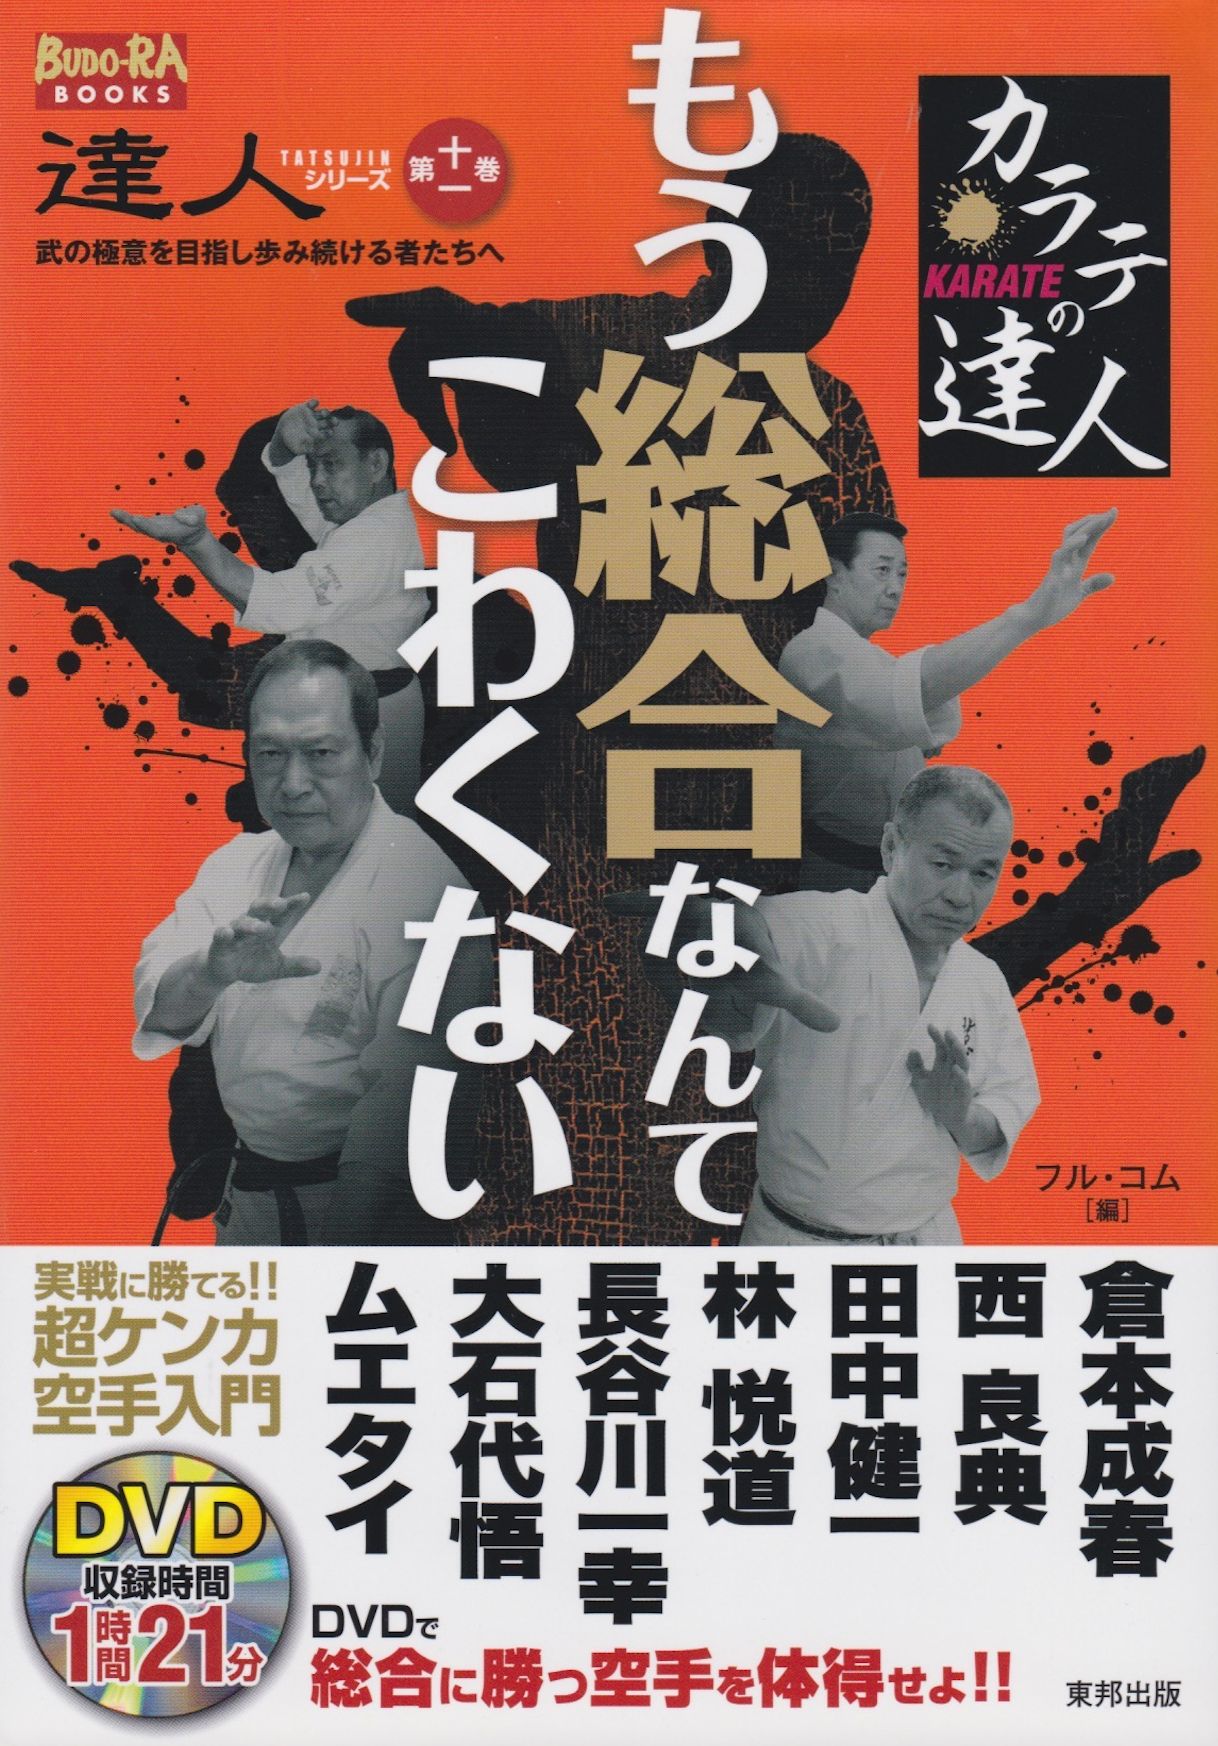 Tatsujin Vol 11: For Those Who Aim for the Secret of Martial Arts Book & DVD